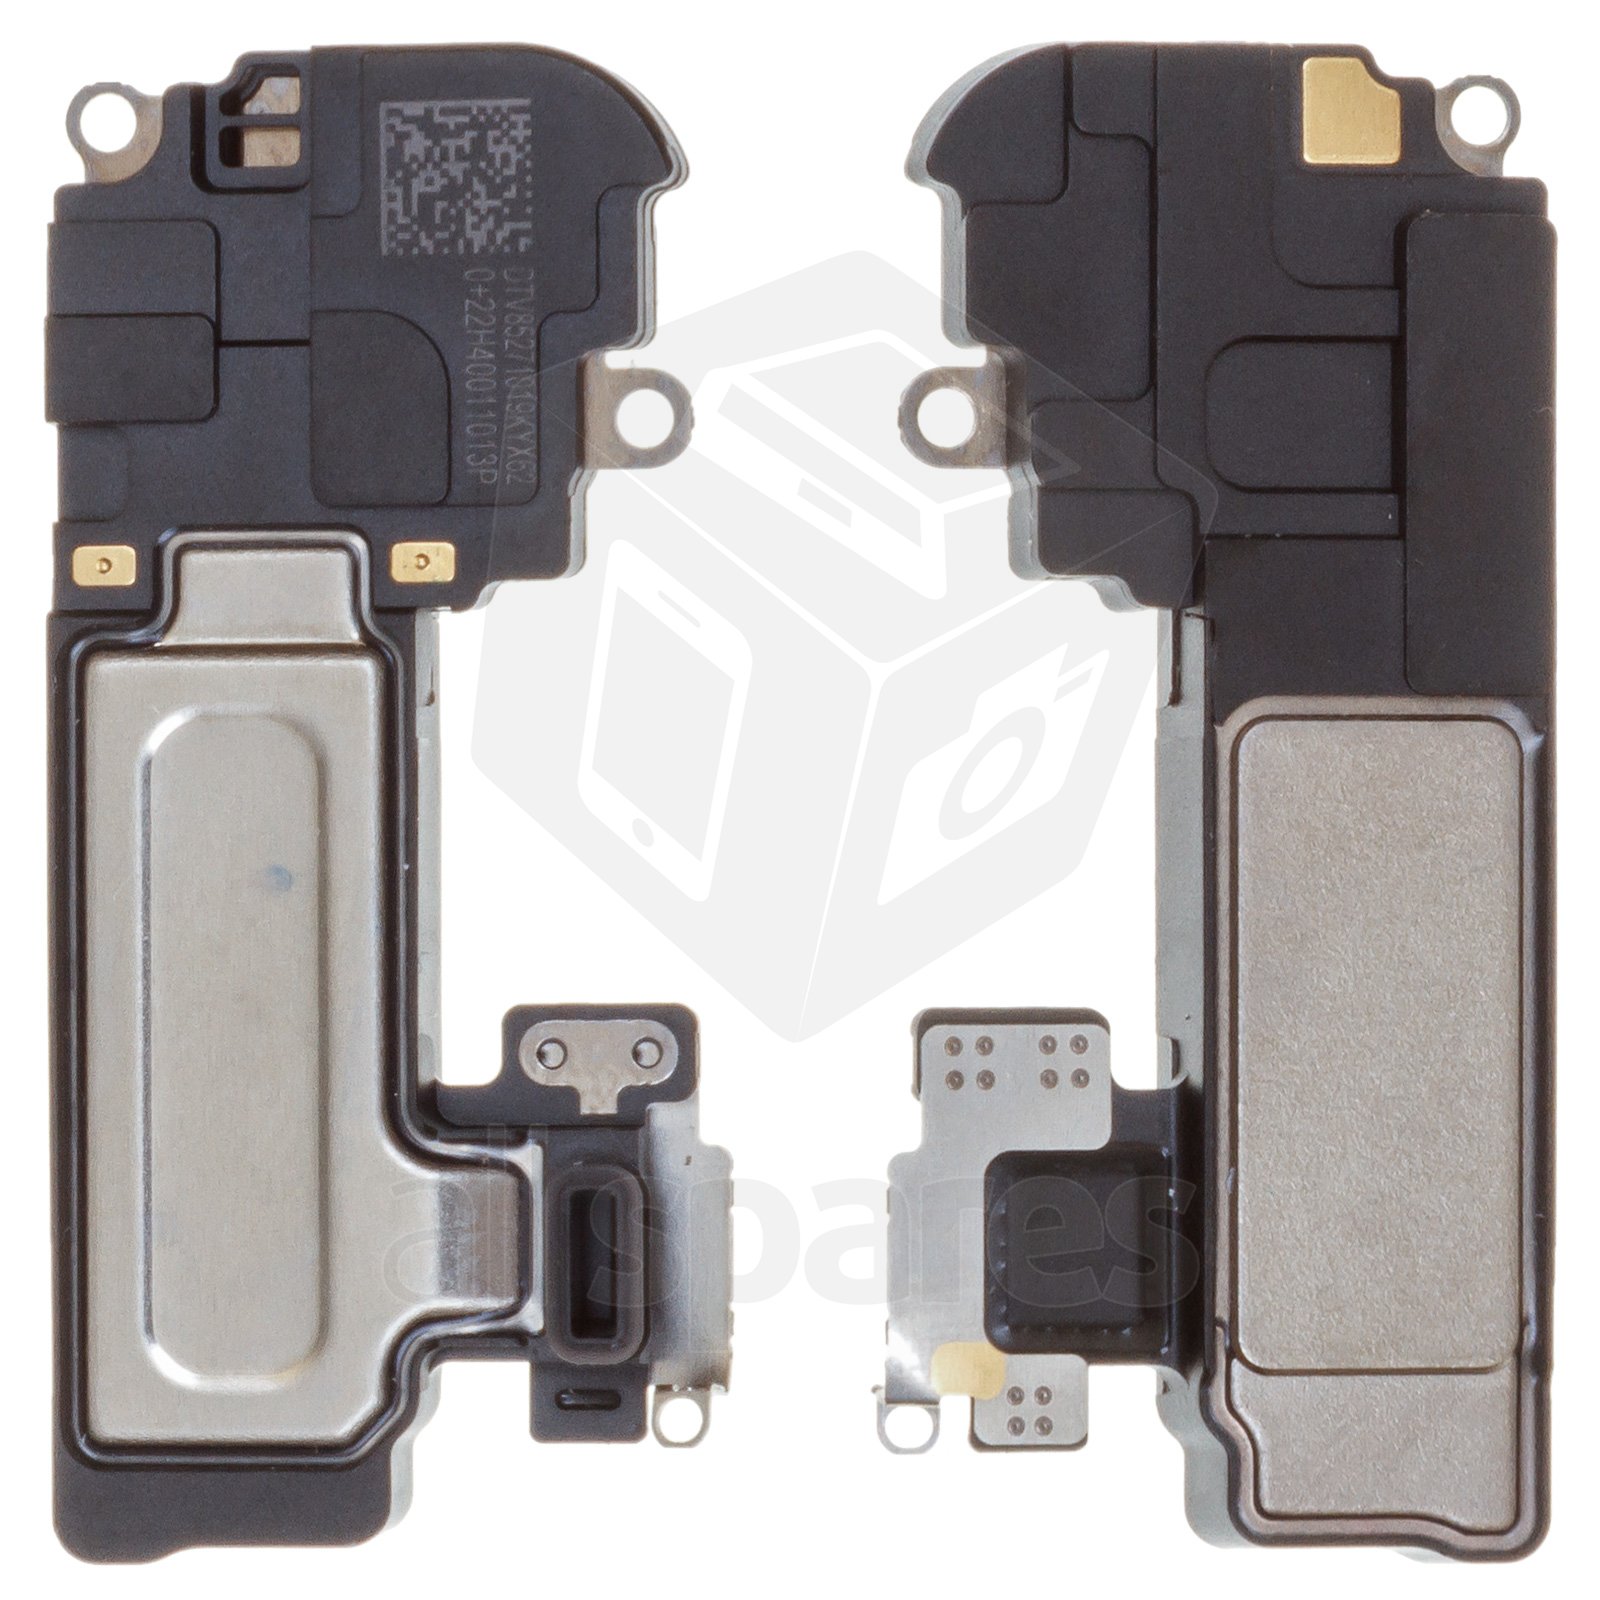 Speaker compatible with iPhone 11 Pro Max - All Spares